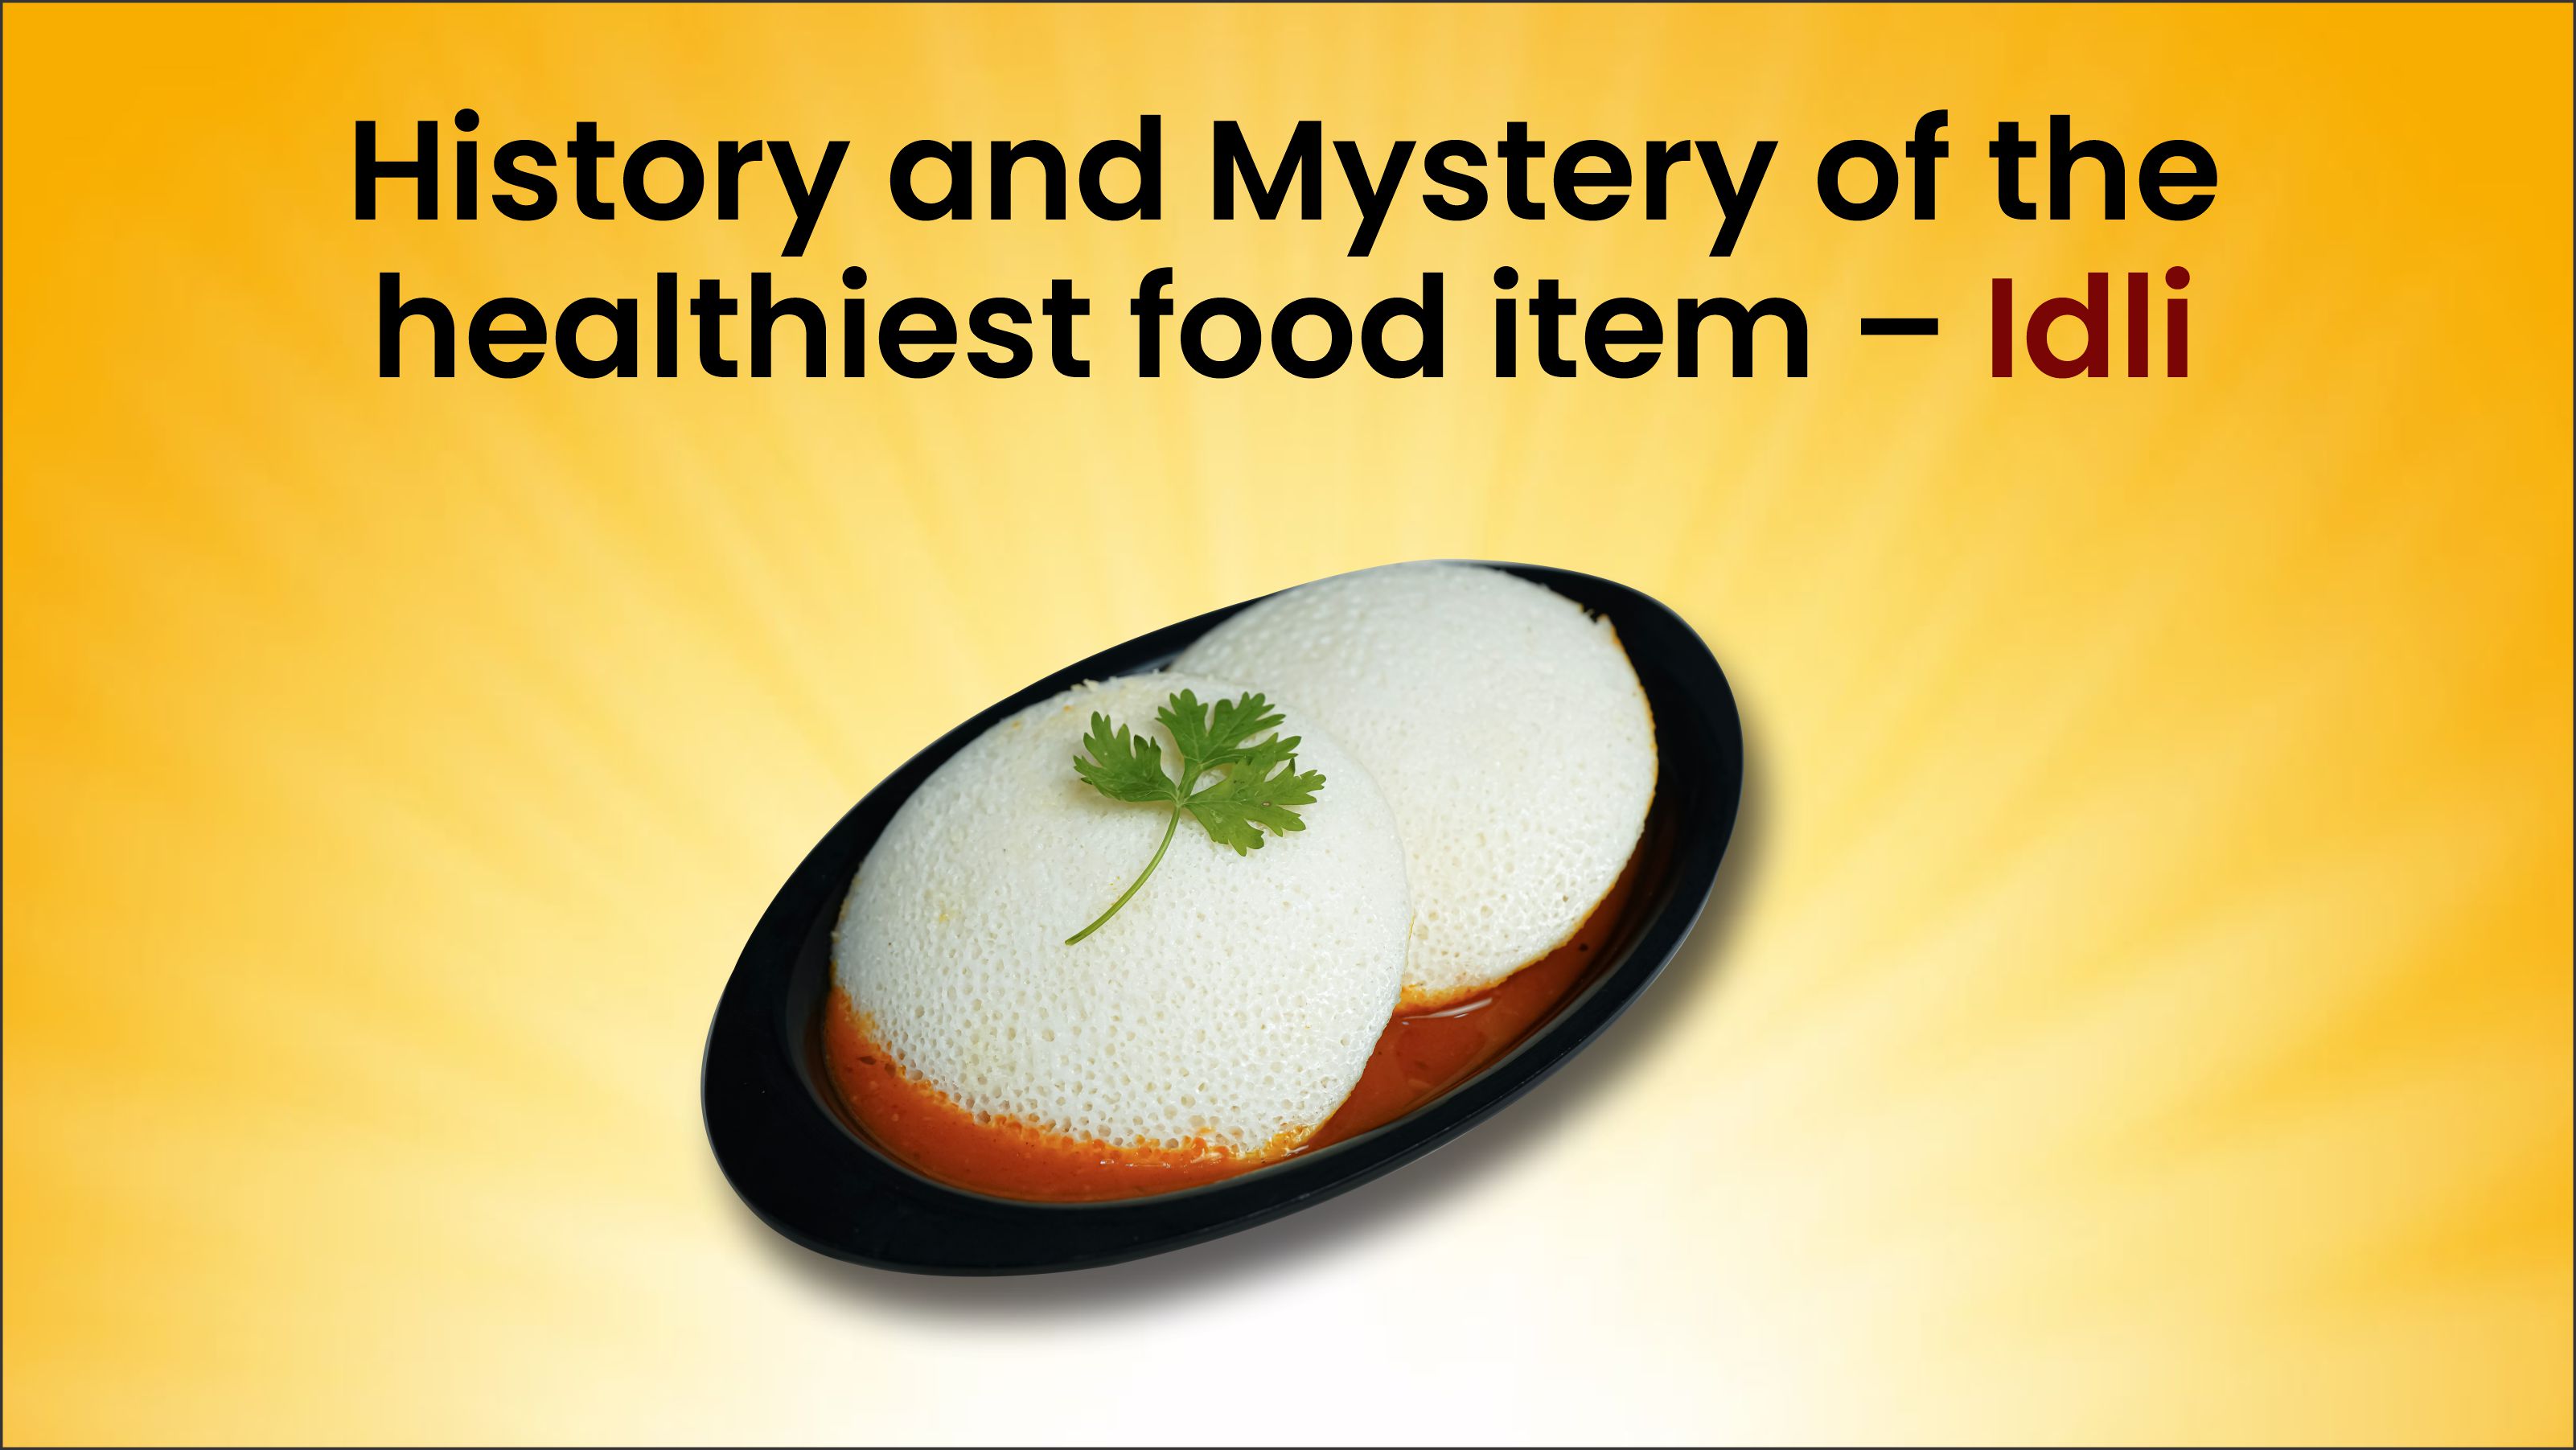 History and Mystery of the healthiest food item – Idli